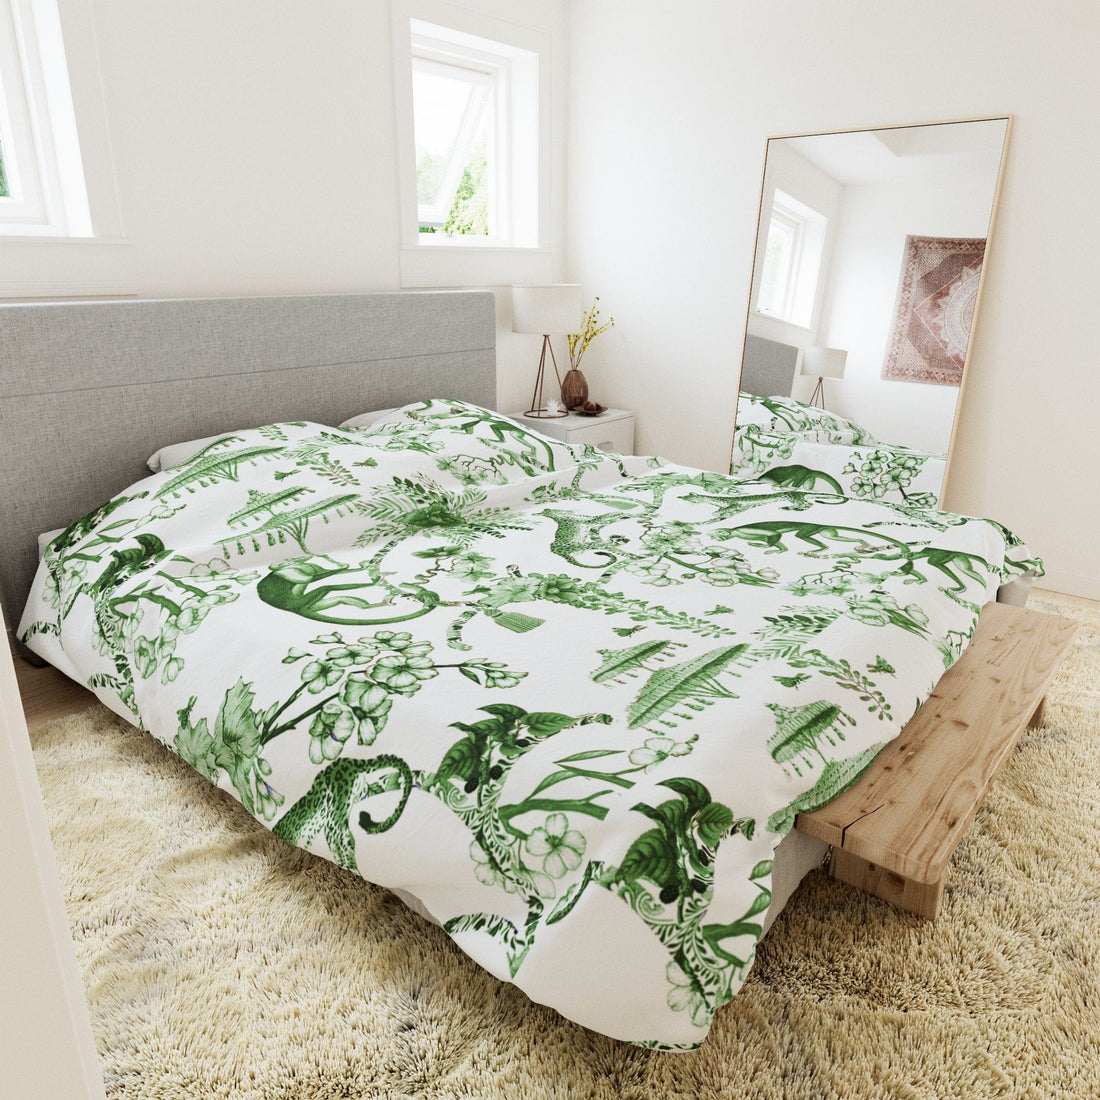 Kate McEnroe New York Chinoiserie Duvet Cover, Floral Green and White Chinoiserie Jungle, Queen, King, Twin, XL Bedding, Botanical Toile Bedding CollectionDuvet Covers31109295613648555350